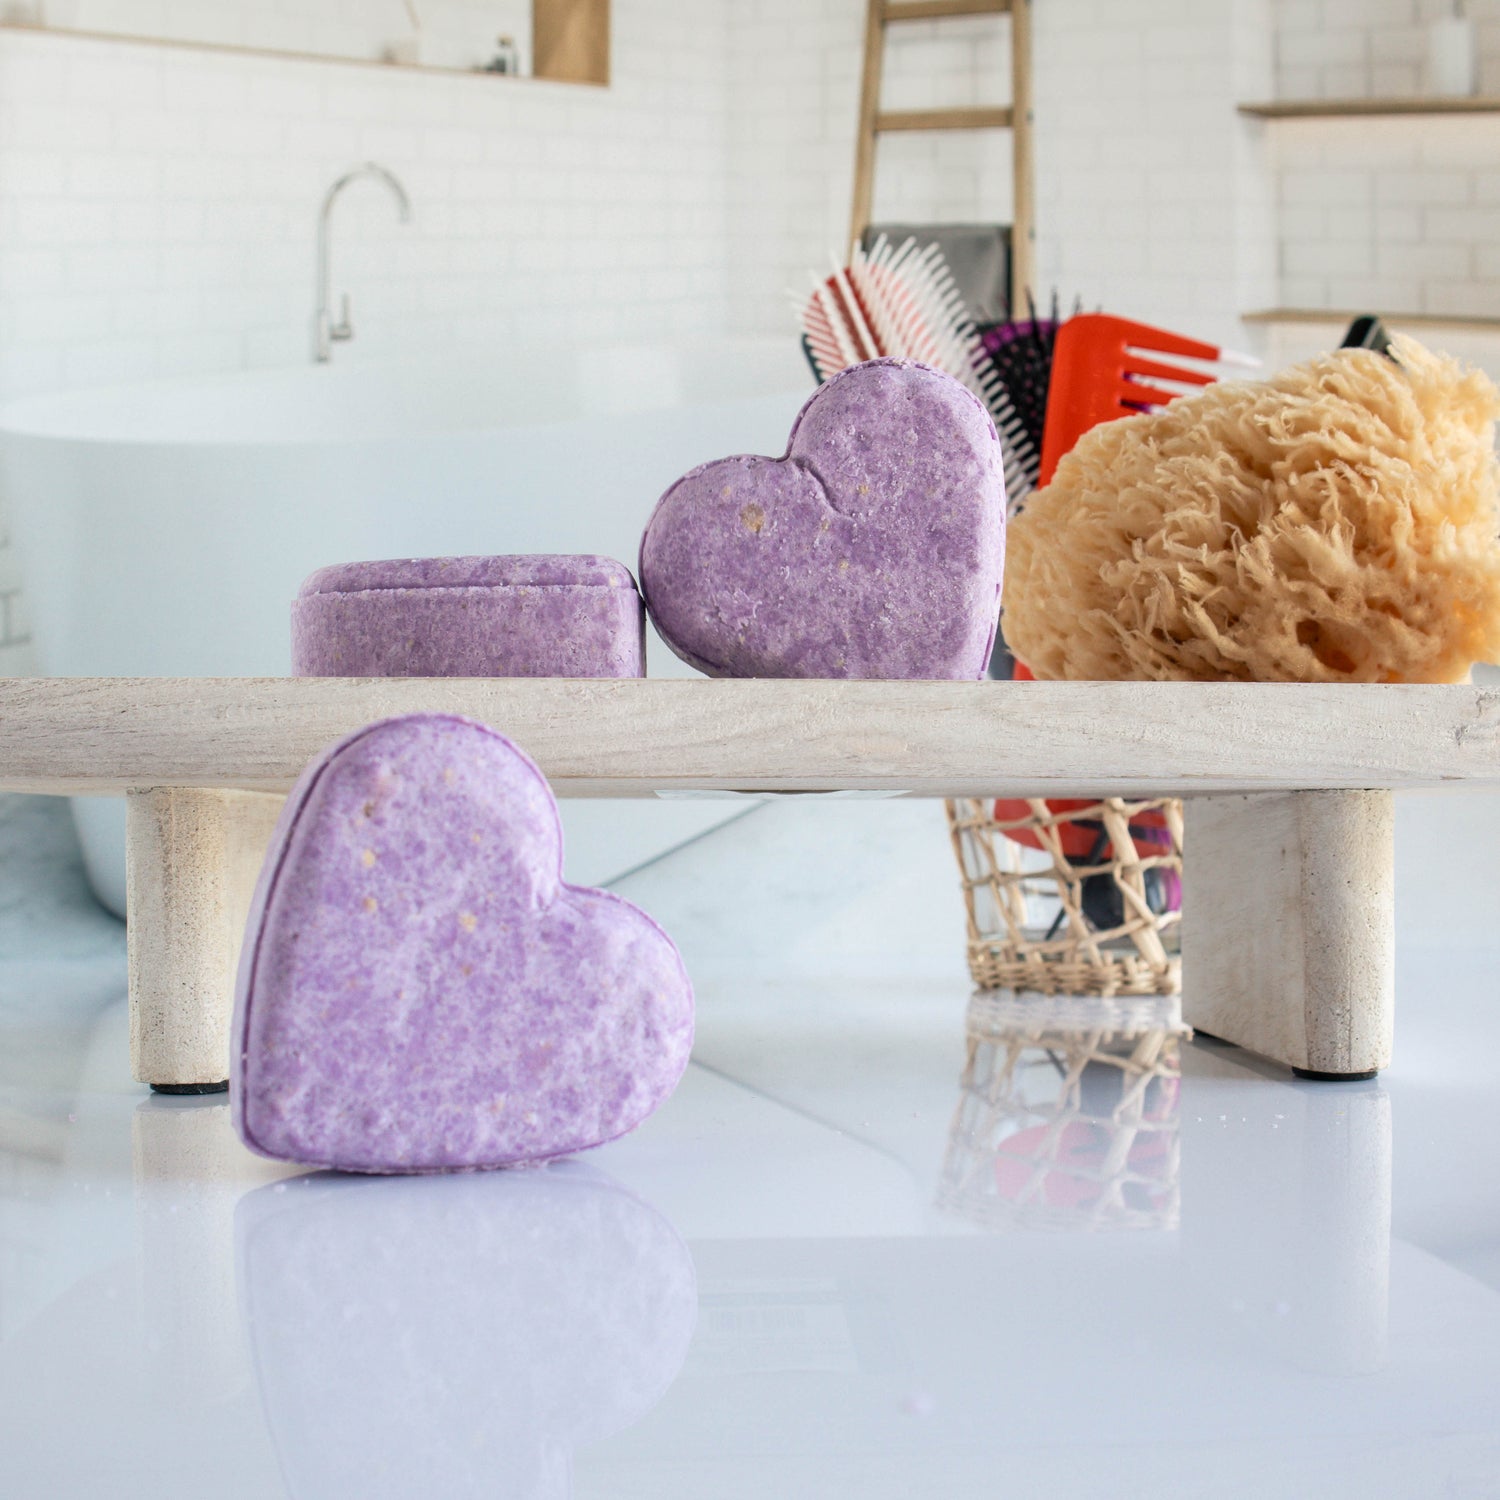 3 deep purple botanical bliss shampoo bars shaped in a heart. One is leaning on its side while the other two are on a trey, one leaning on the other. there is a loofah next to them with a cup of hair tools in the background